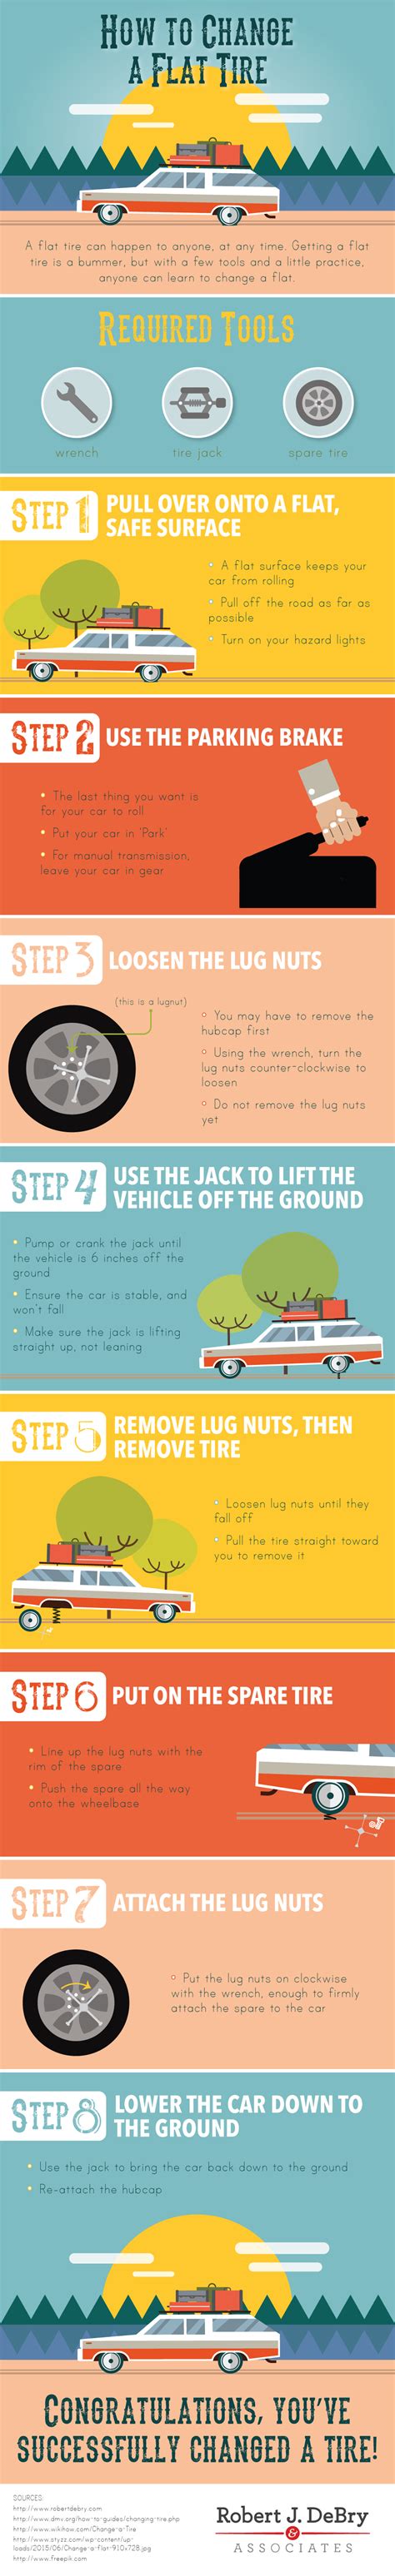 How To Change A Flat Tire Visually